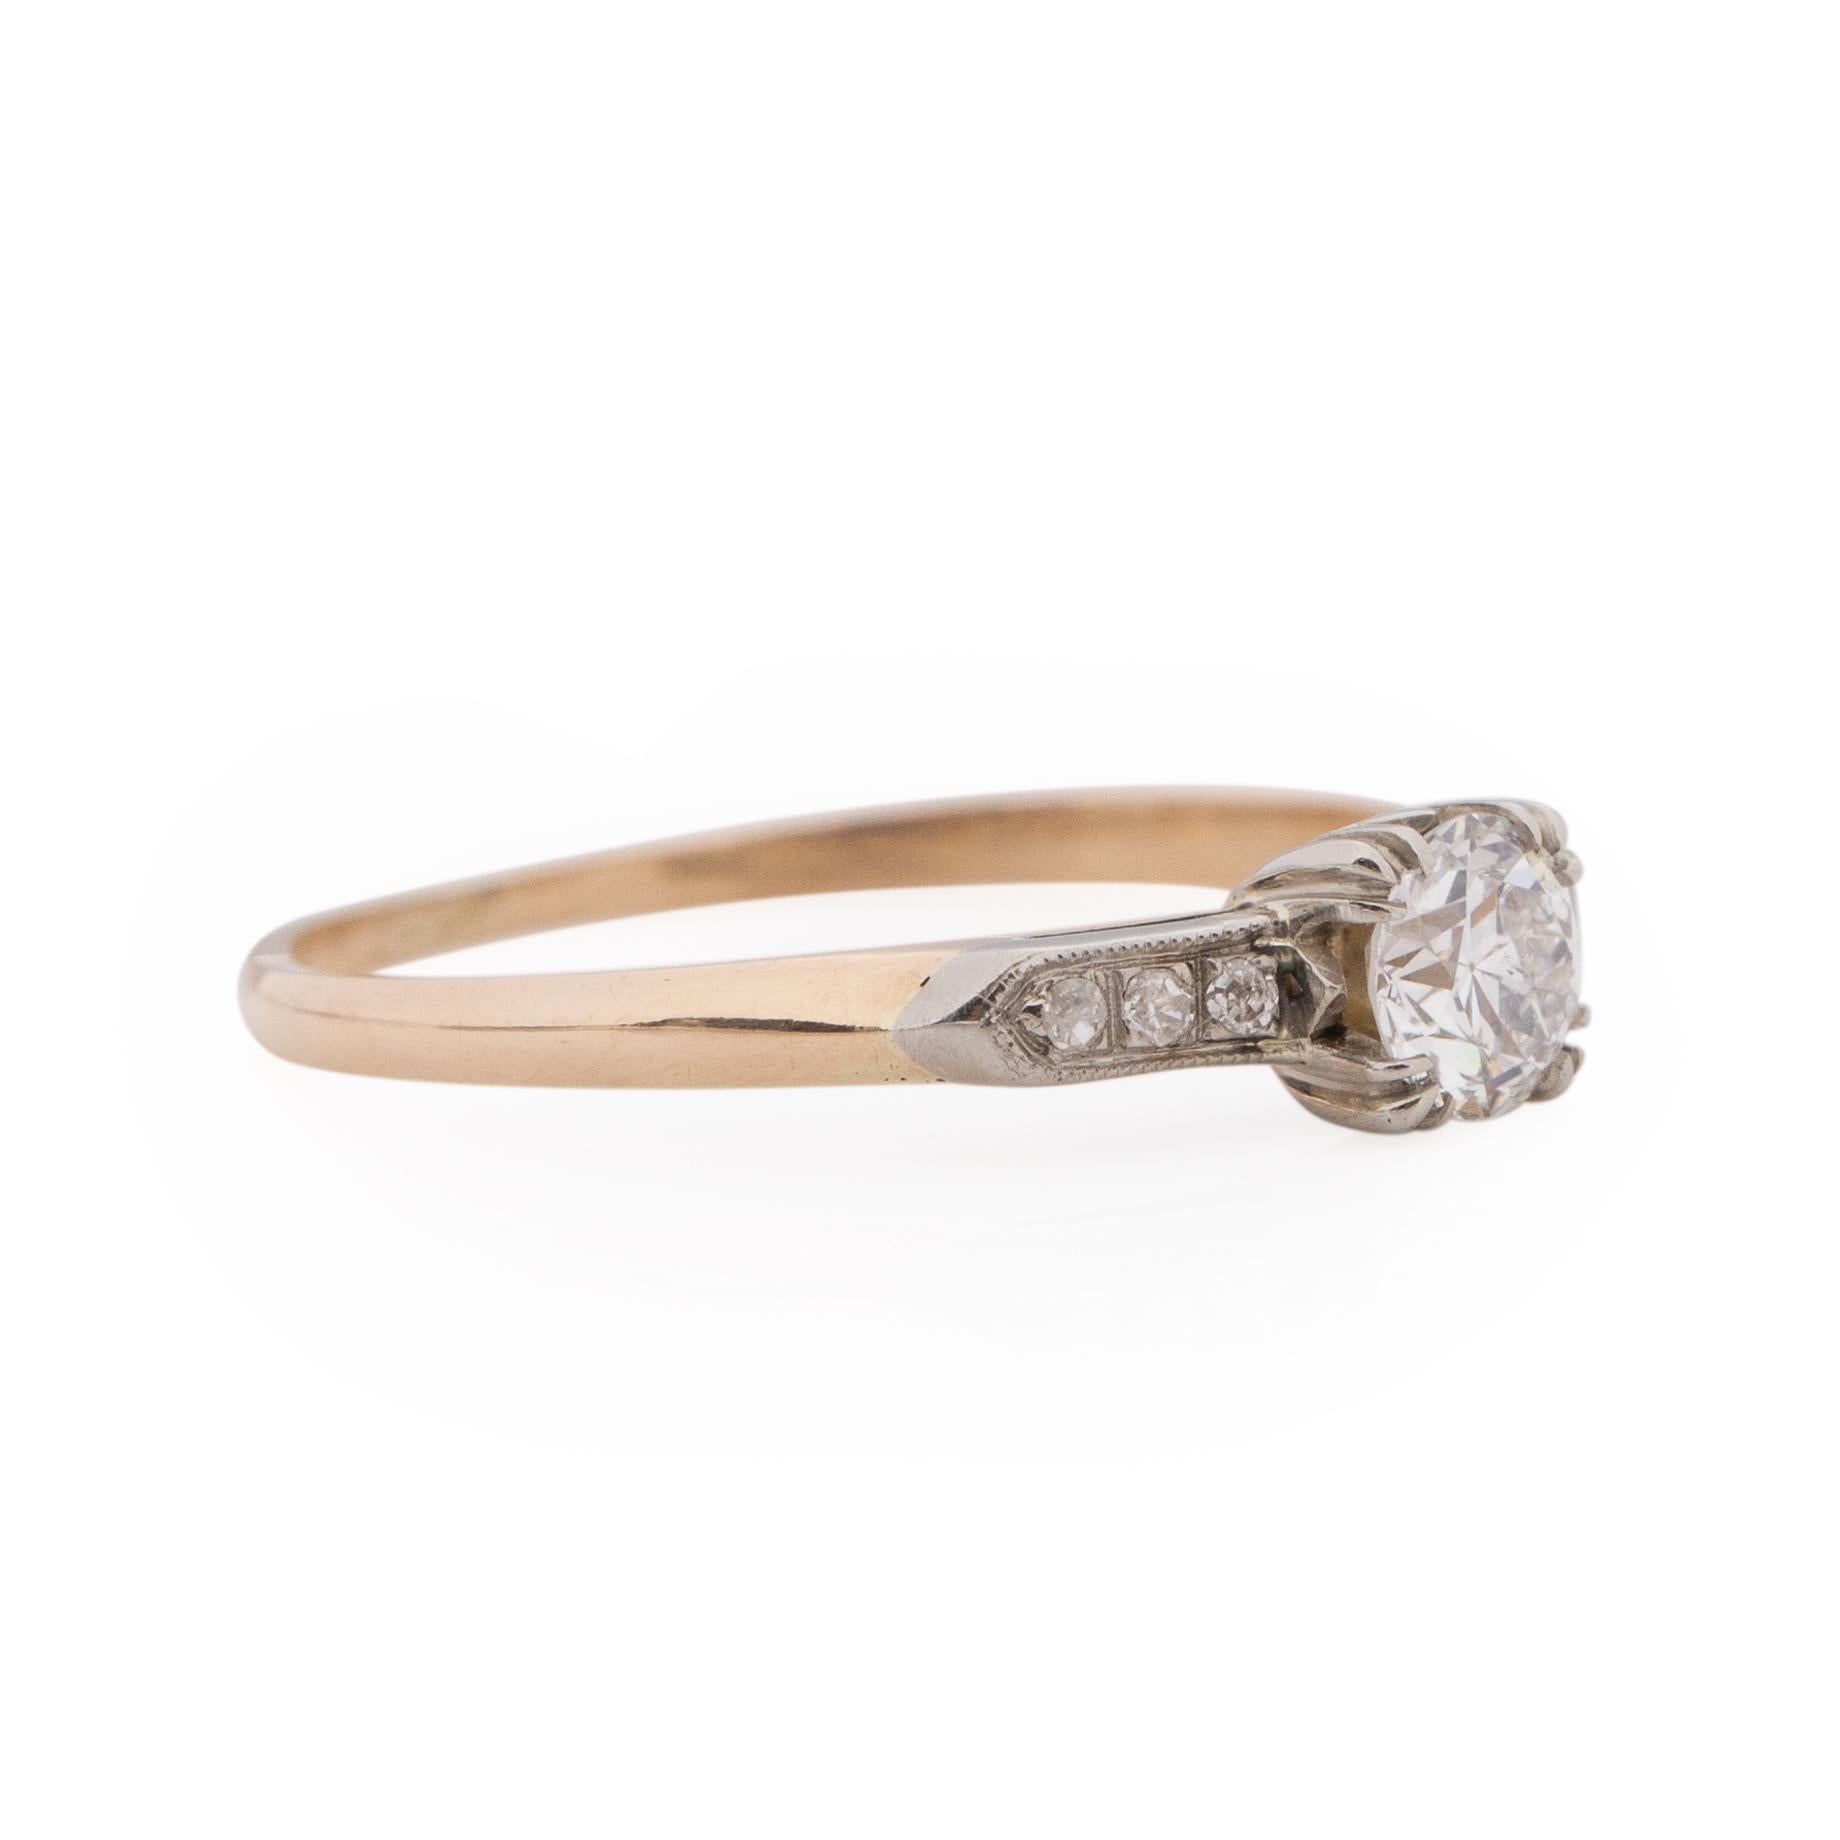 Here we have a elegant and classic art deco vintage solitaire two tone beauty. The two tone look makes the ring flexible to any metal type for the accenting wedding band. In the center is a .38 Ct old euro that has outstanding facets to catch the